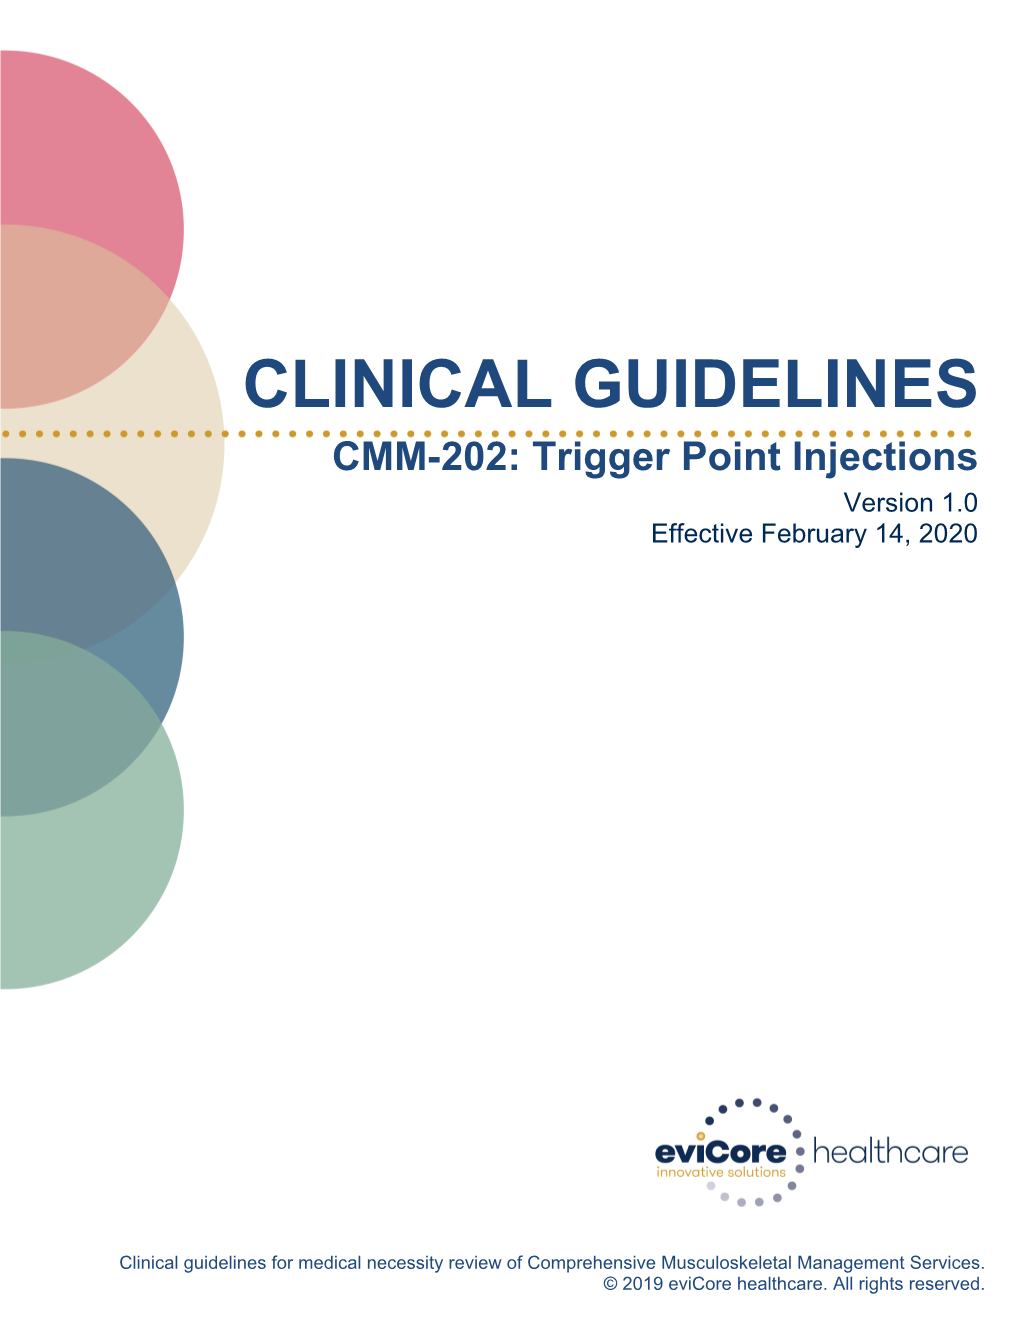 Evicore CMM-202 Trigger Point Injections